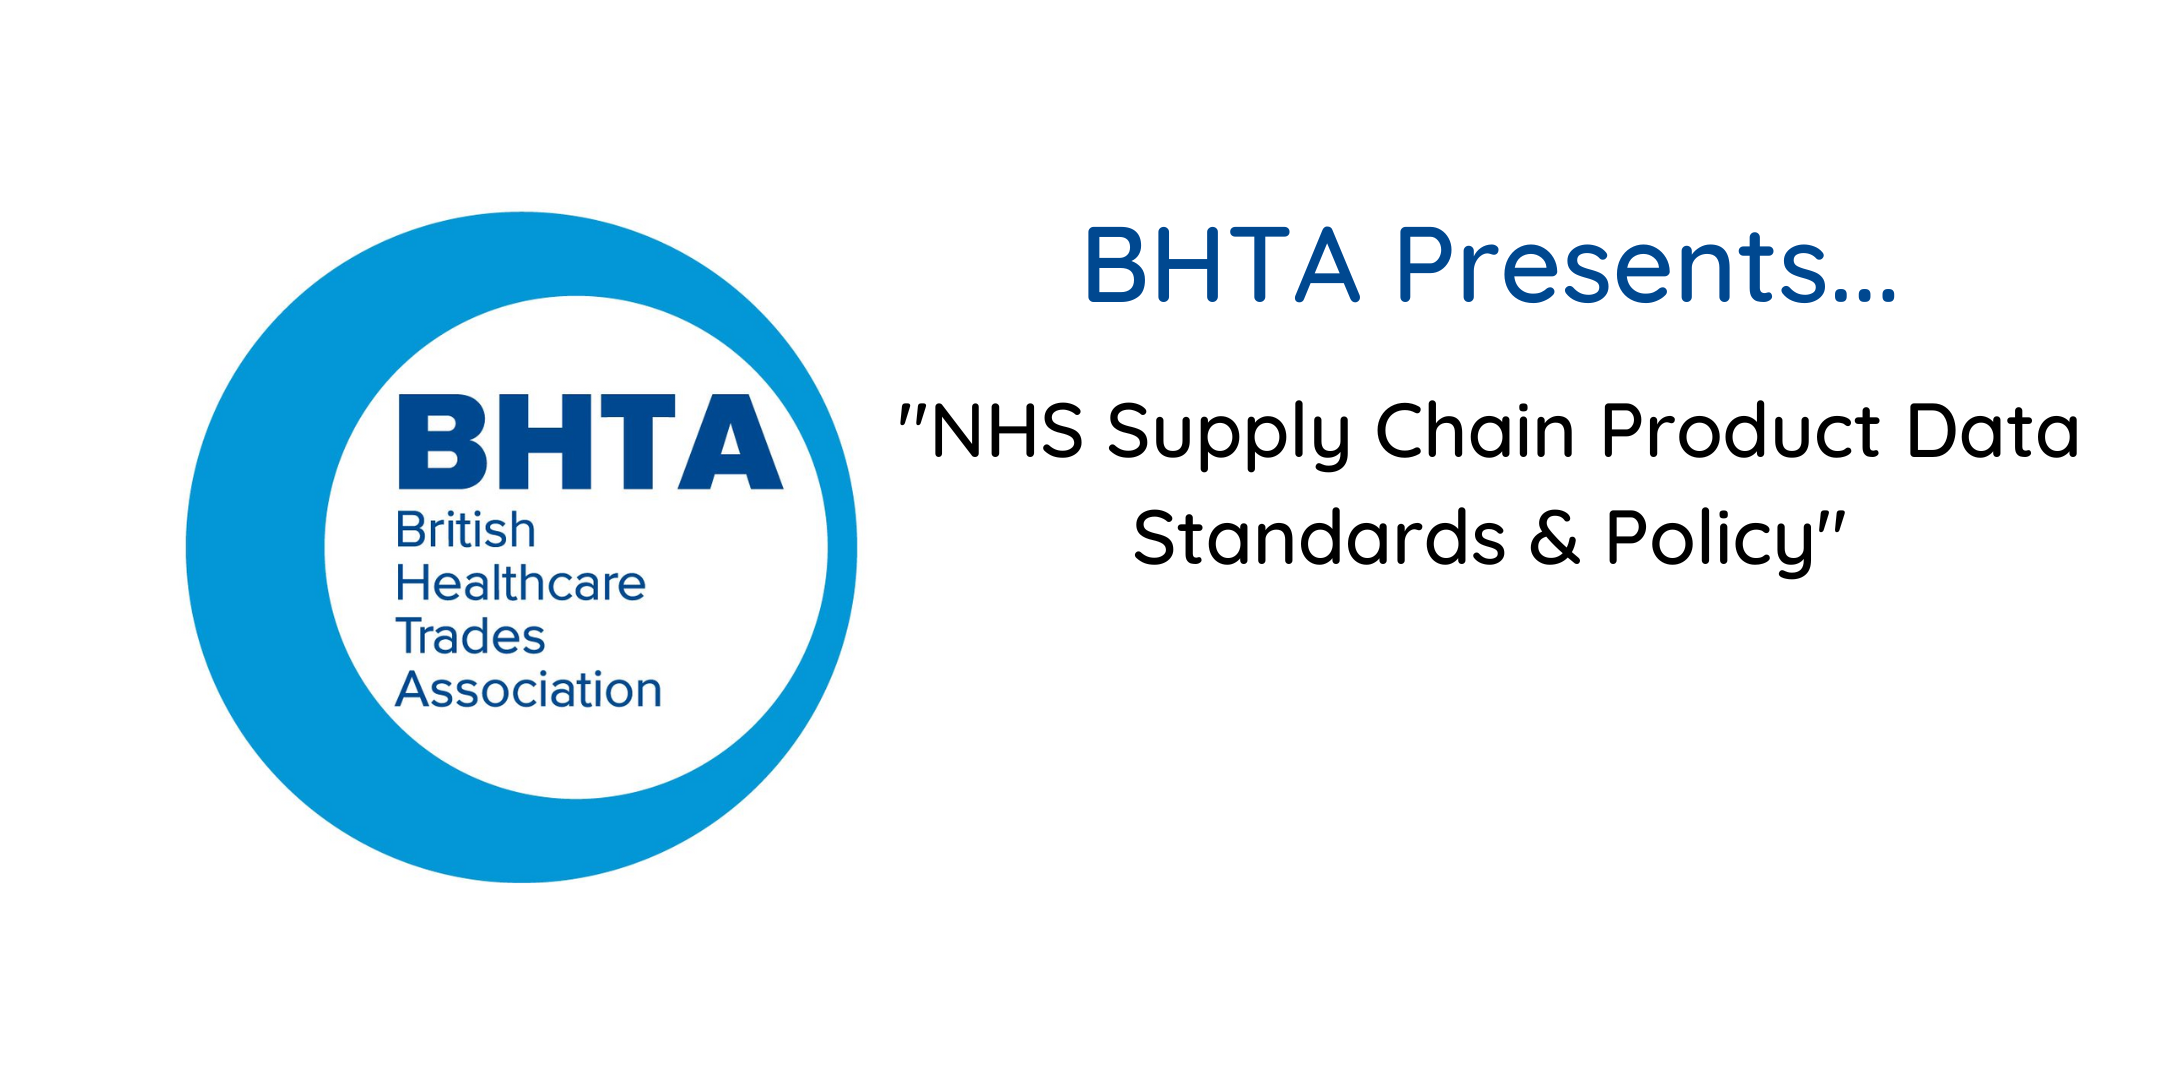 BHTA presents NHS Supply Chain Product Data Standards & Policy